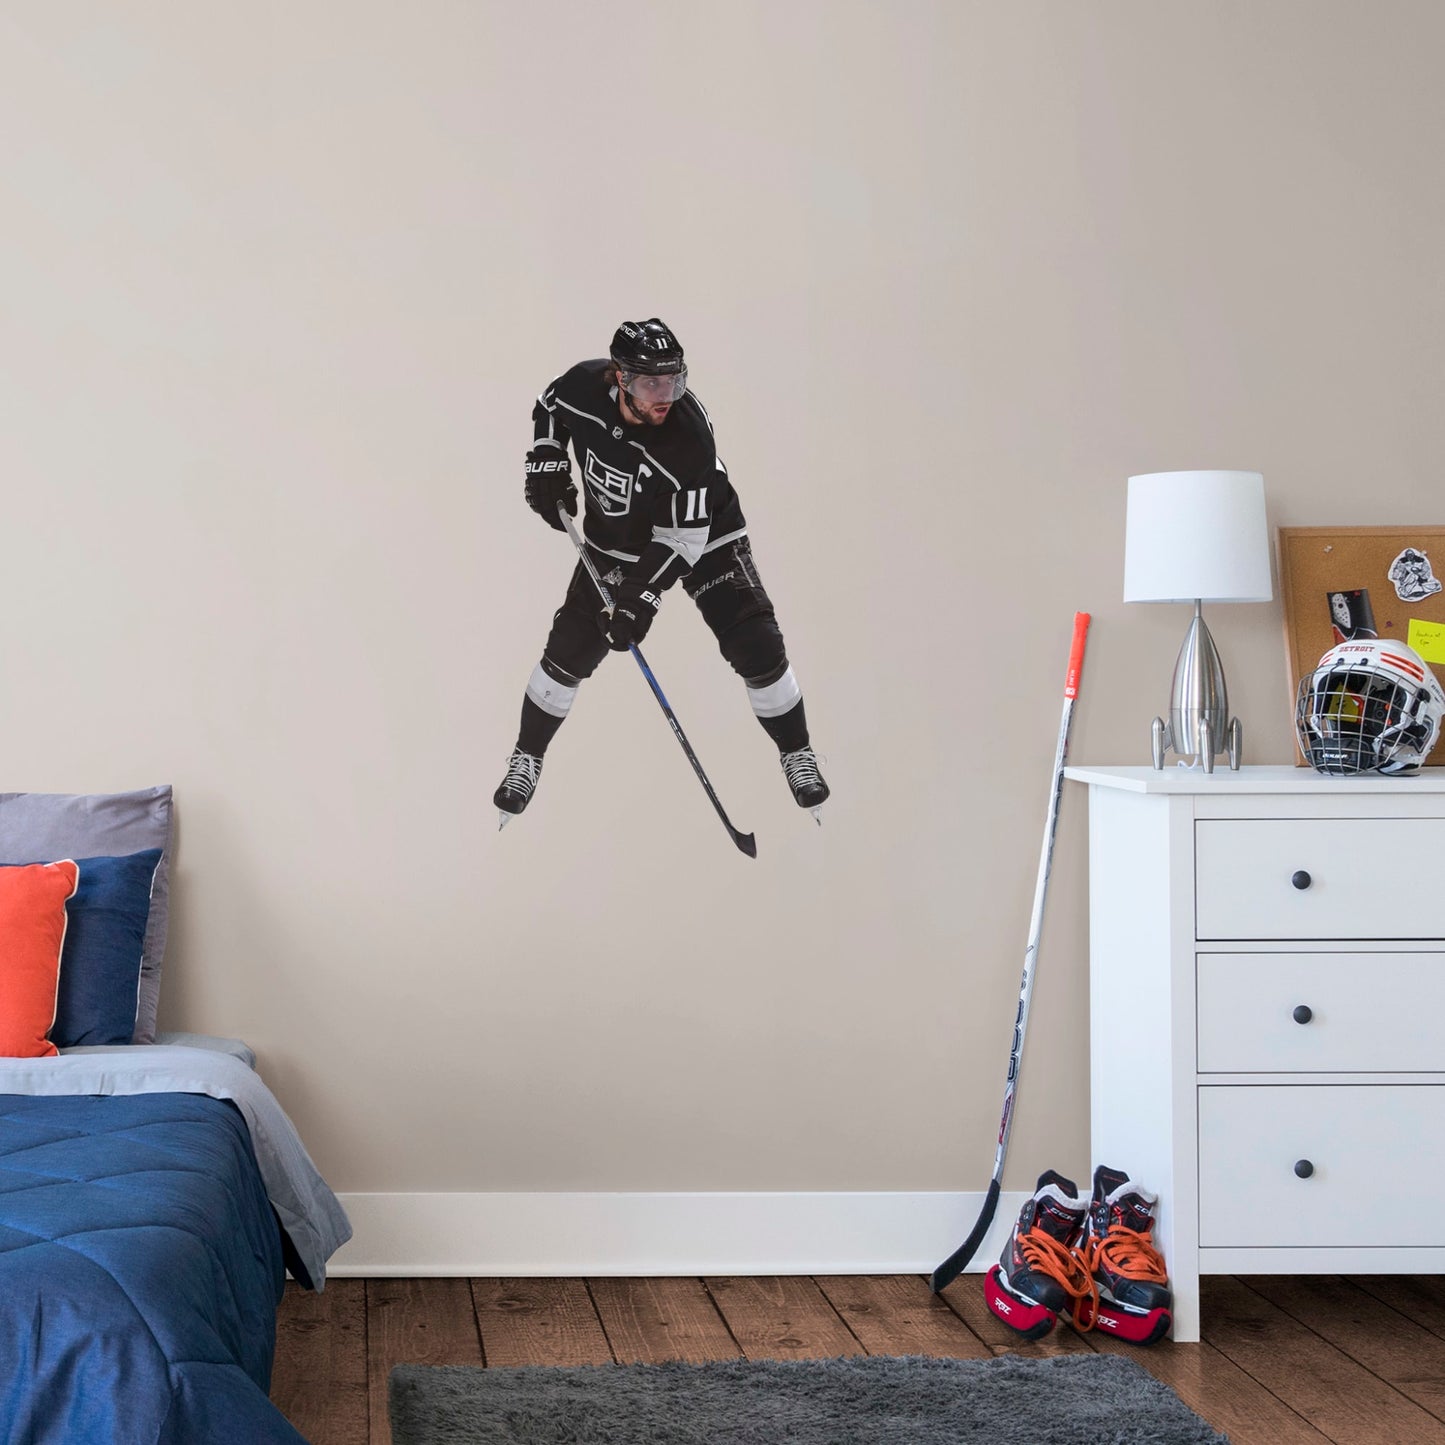 Giant Athlete + 2 Decals (32"W x 51"H) NHL fans and Kings fanatics alike love Anze Kopitar, the clutch captain from Los Angeles, and now you can bring his skill to life in your own home! Seen here in his home uniform in action on the ice, this durable, bold, and removable wall decal will make the perfect addition to your bedroom, office, fan room, or any spot in your house! Let's Go Kings!